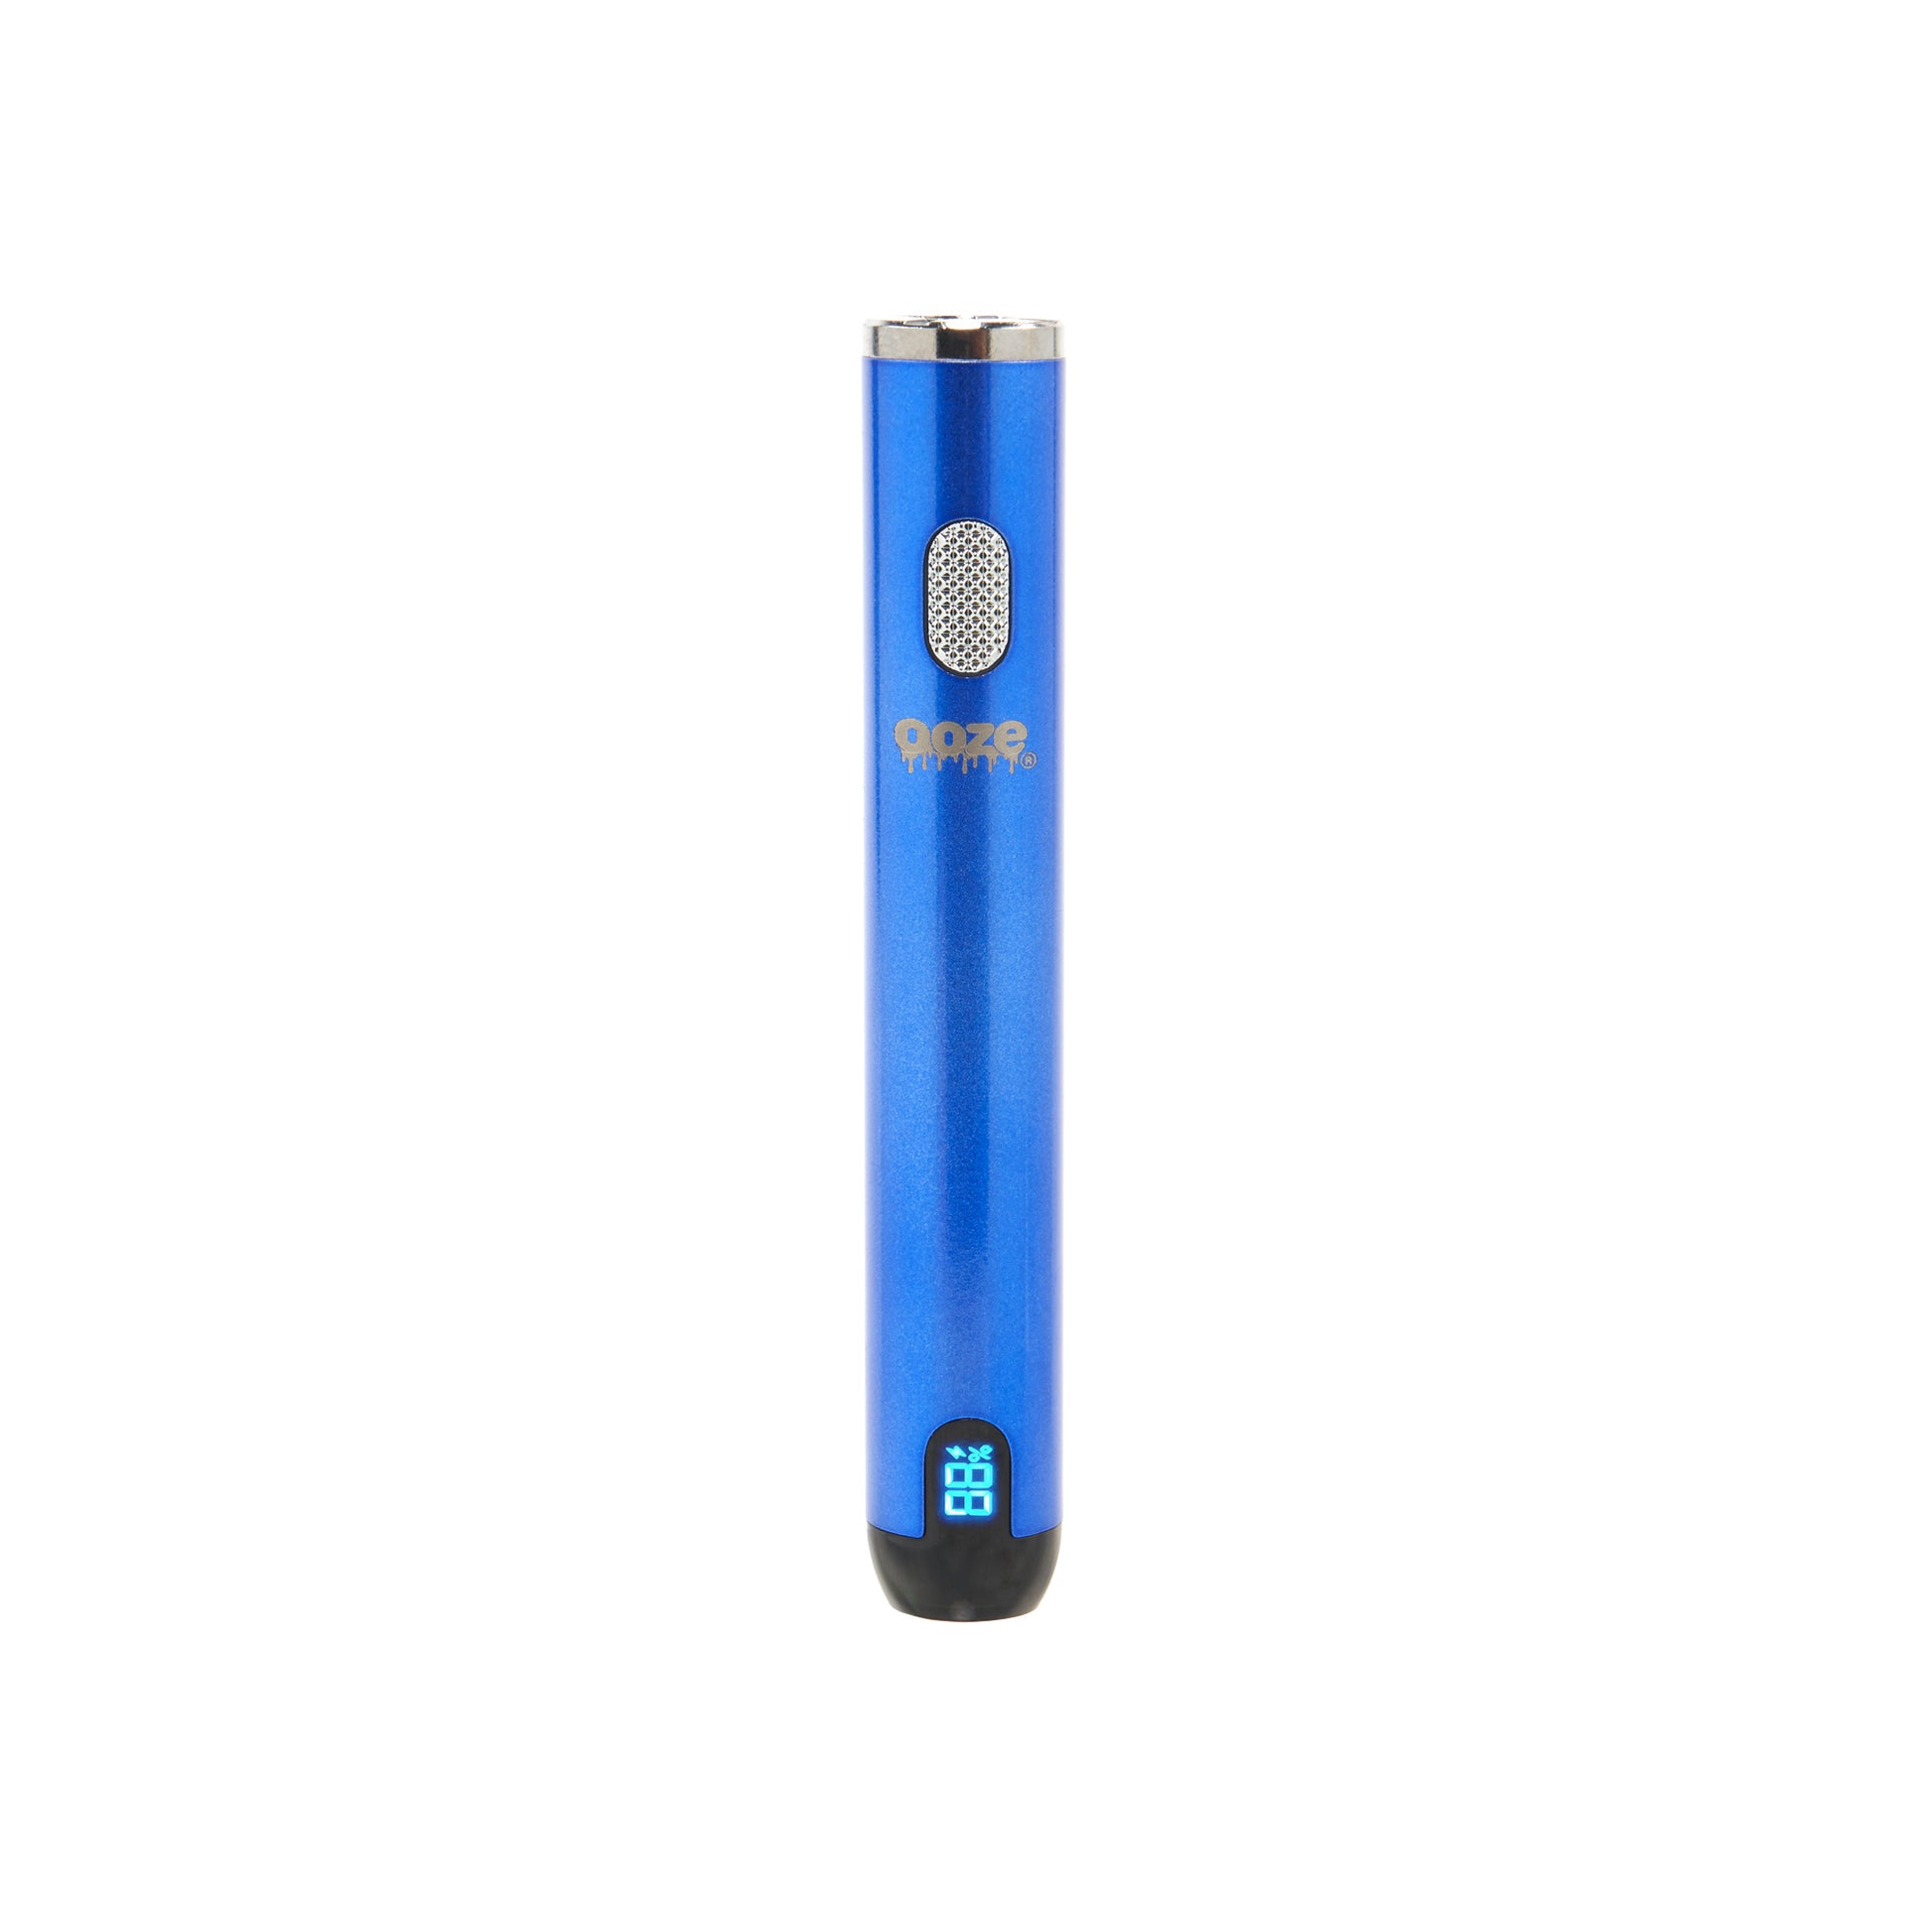 The sapphire blue Ooze Smart Battery is upright and turned on without the charger